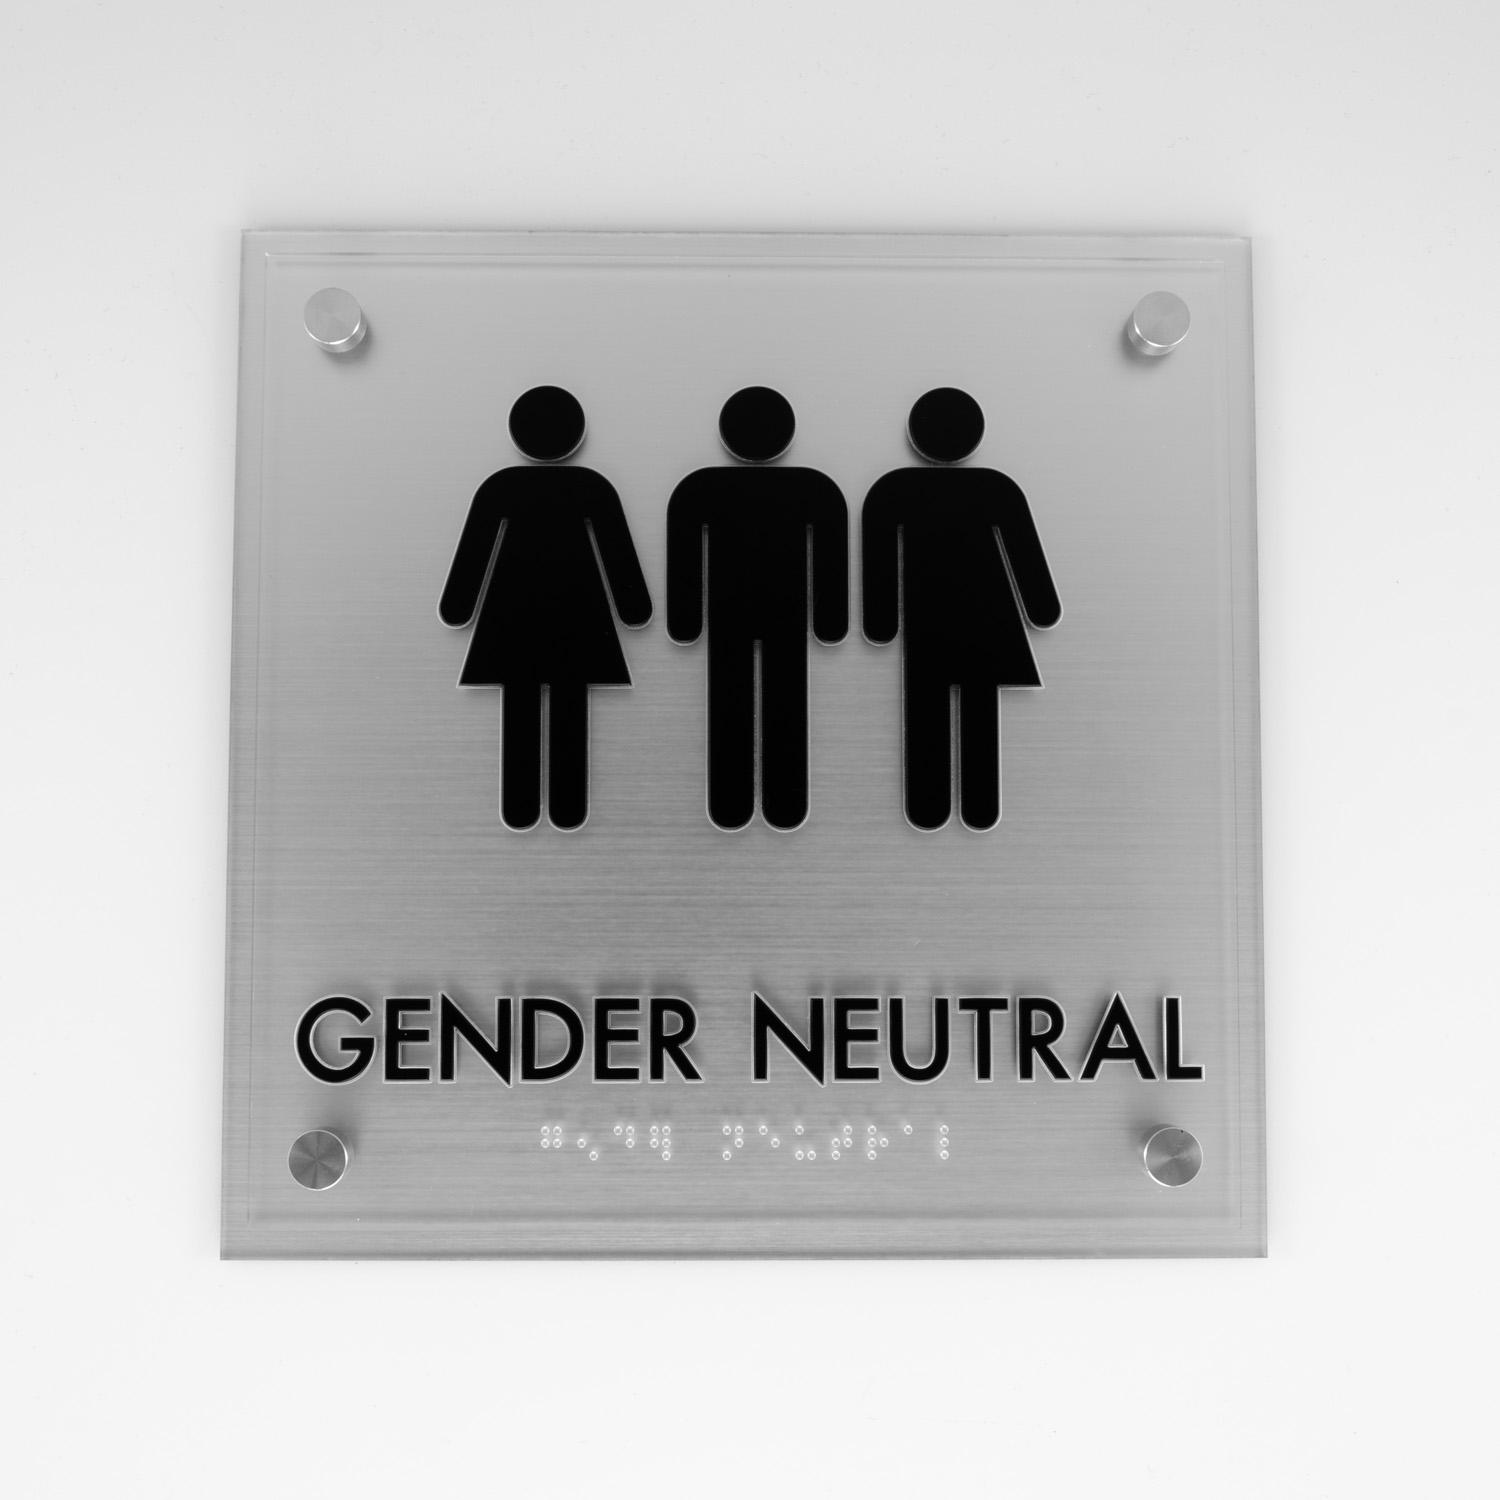 Product Gender Neutral Restroom Sign, 8.5" x 8.5", ADA, Crystal Non-Glare Acrylic, Stainless Steel Standoff Caps and Brushed Aluminum Look - Erie Custom Signs image